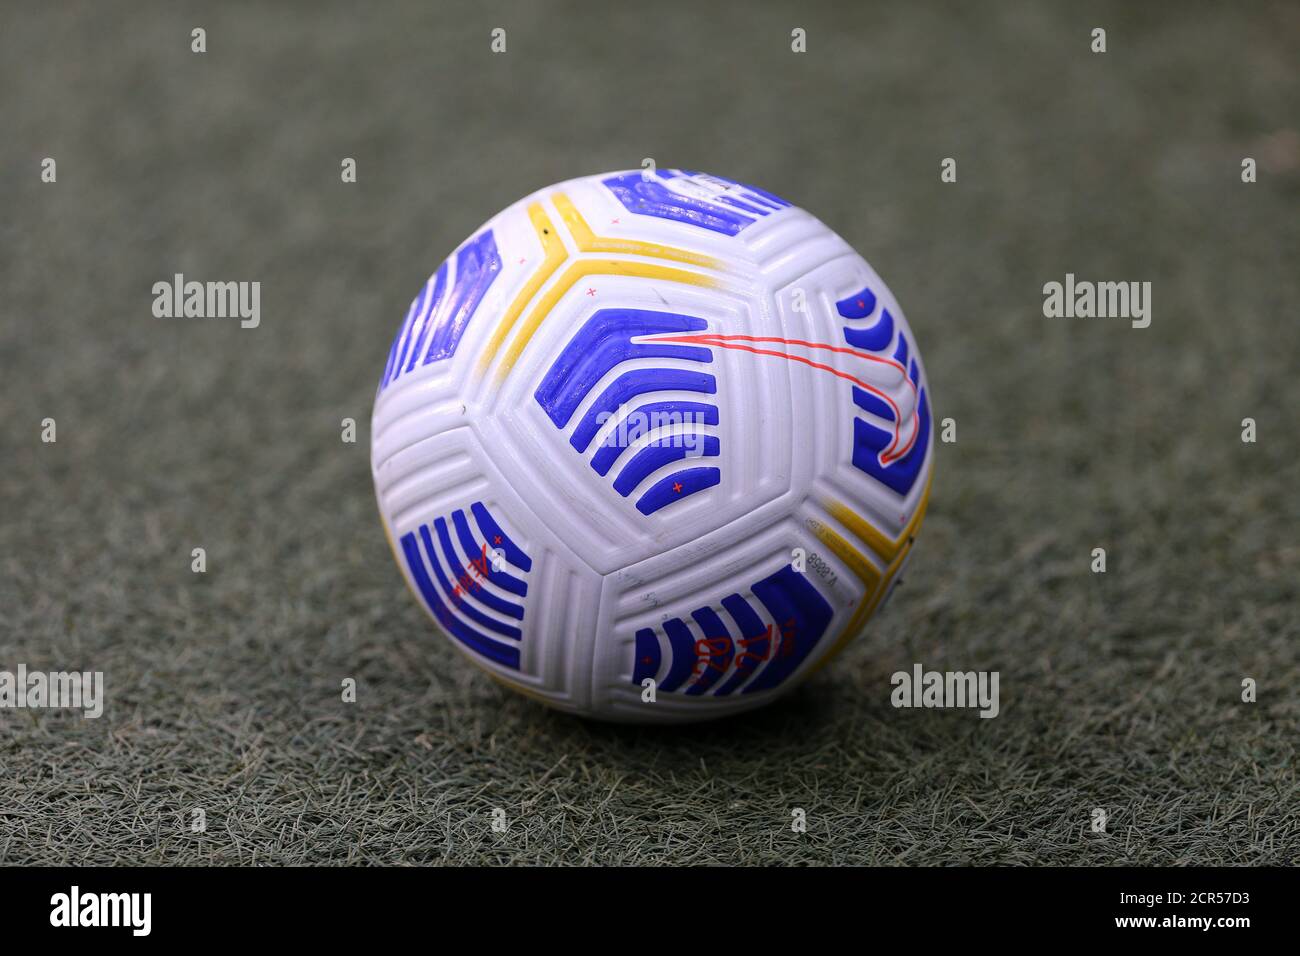 Serie A Nike flight official balls are seen on the pitch during the friendly football match between   FC Internazionale and Pisa Sc. . Fc Internazionale wins 7-0 over Pisa Ac. Stock Photo